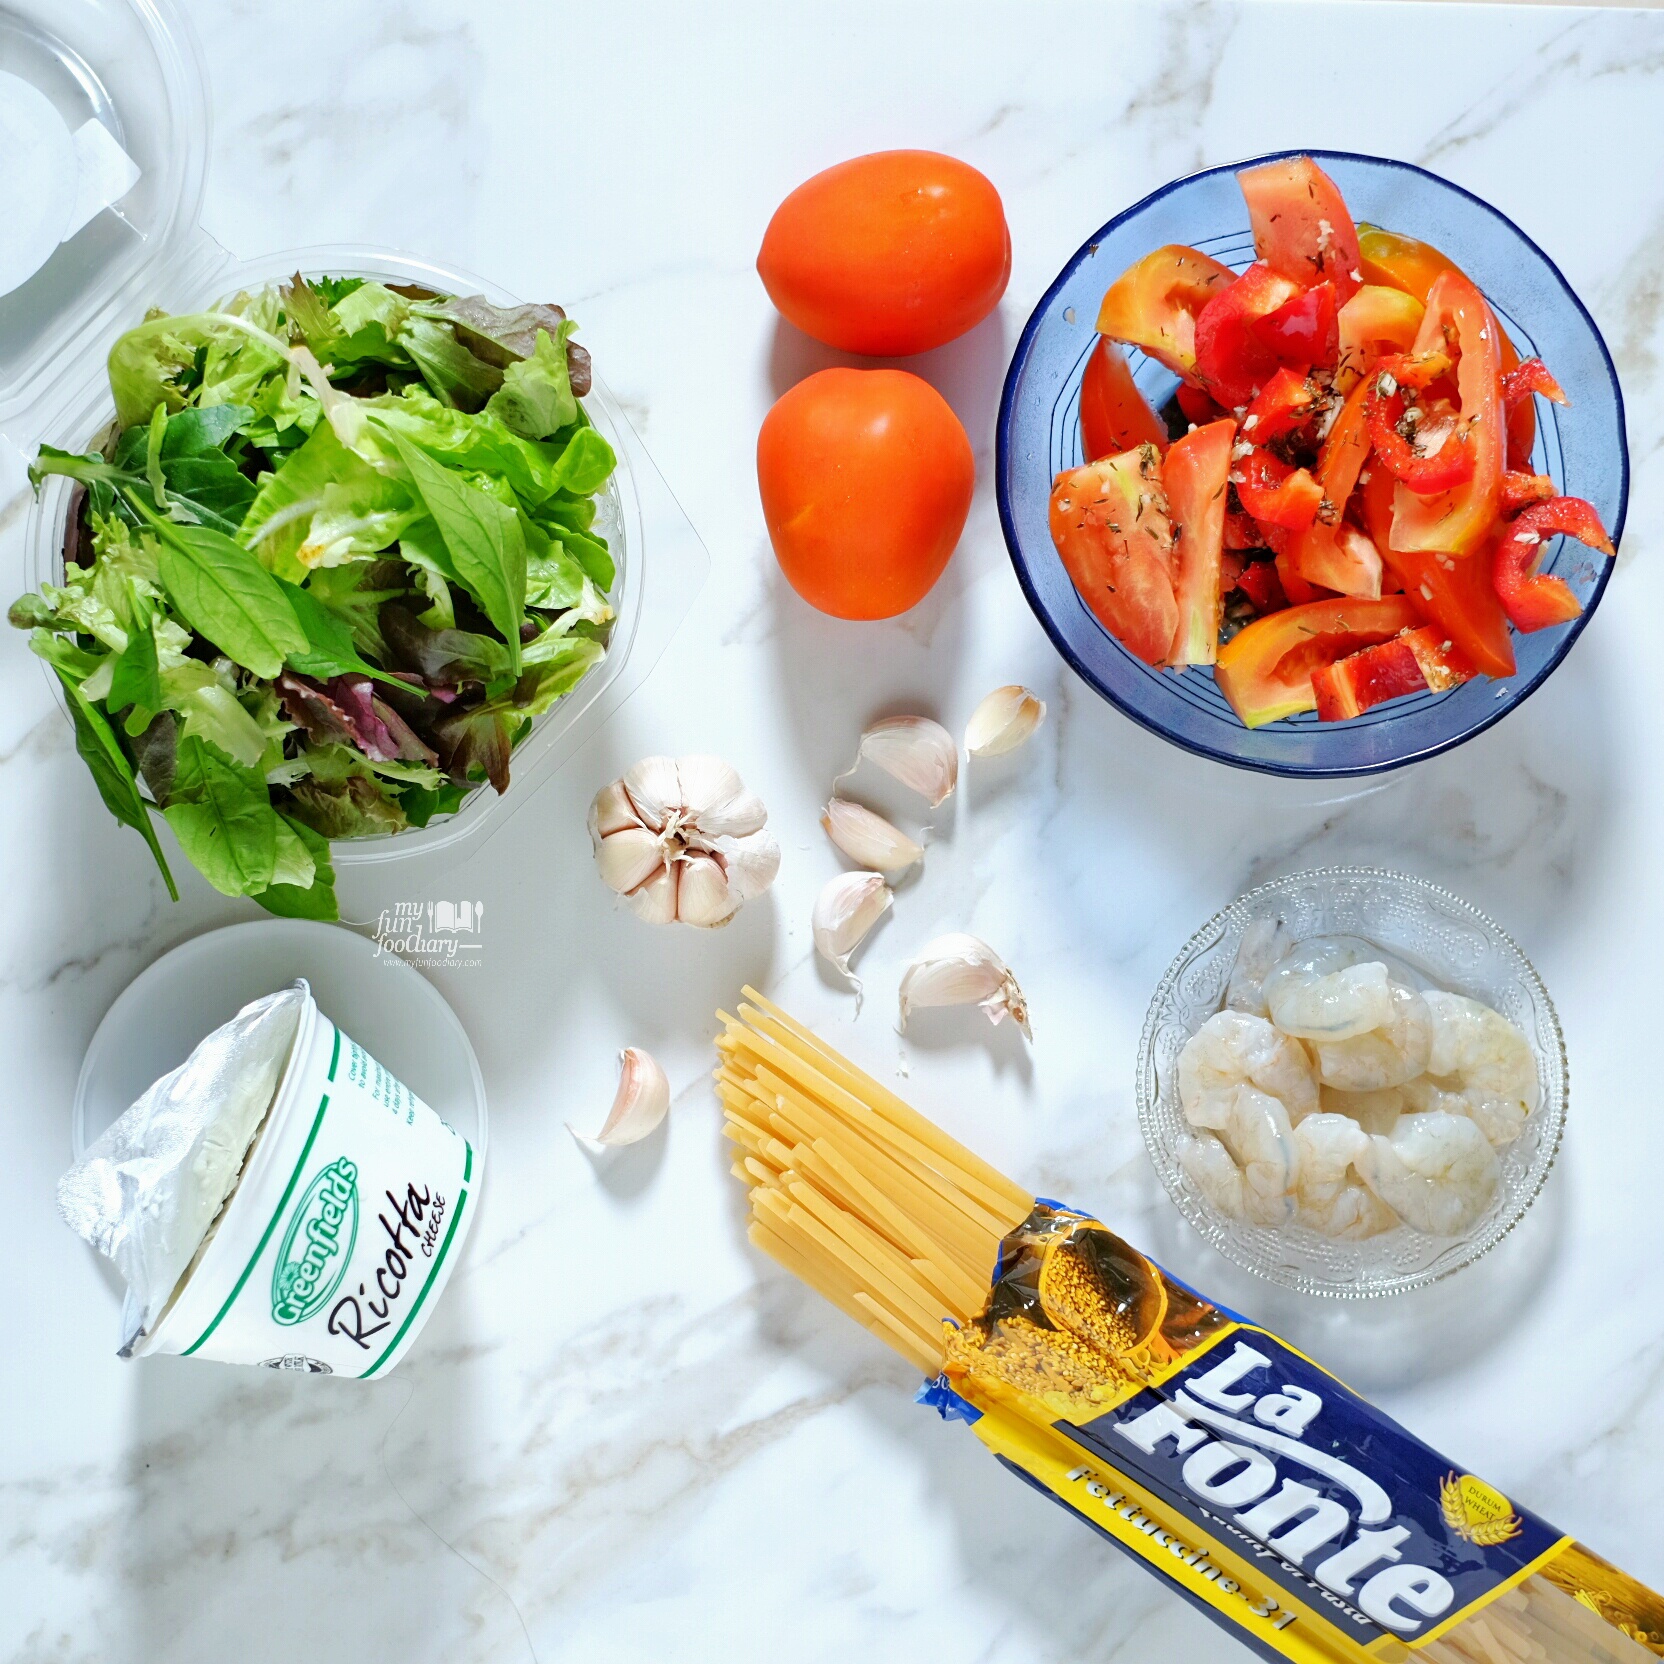 Ingredients to make Roast Prawn Fettuccine with Ricotta Cheese by Myfunfoodiary